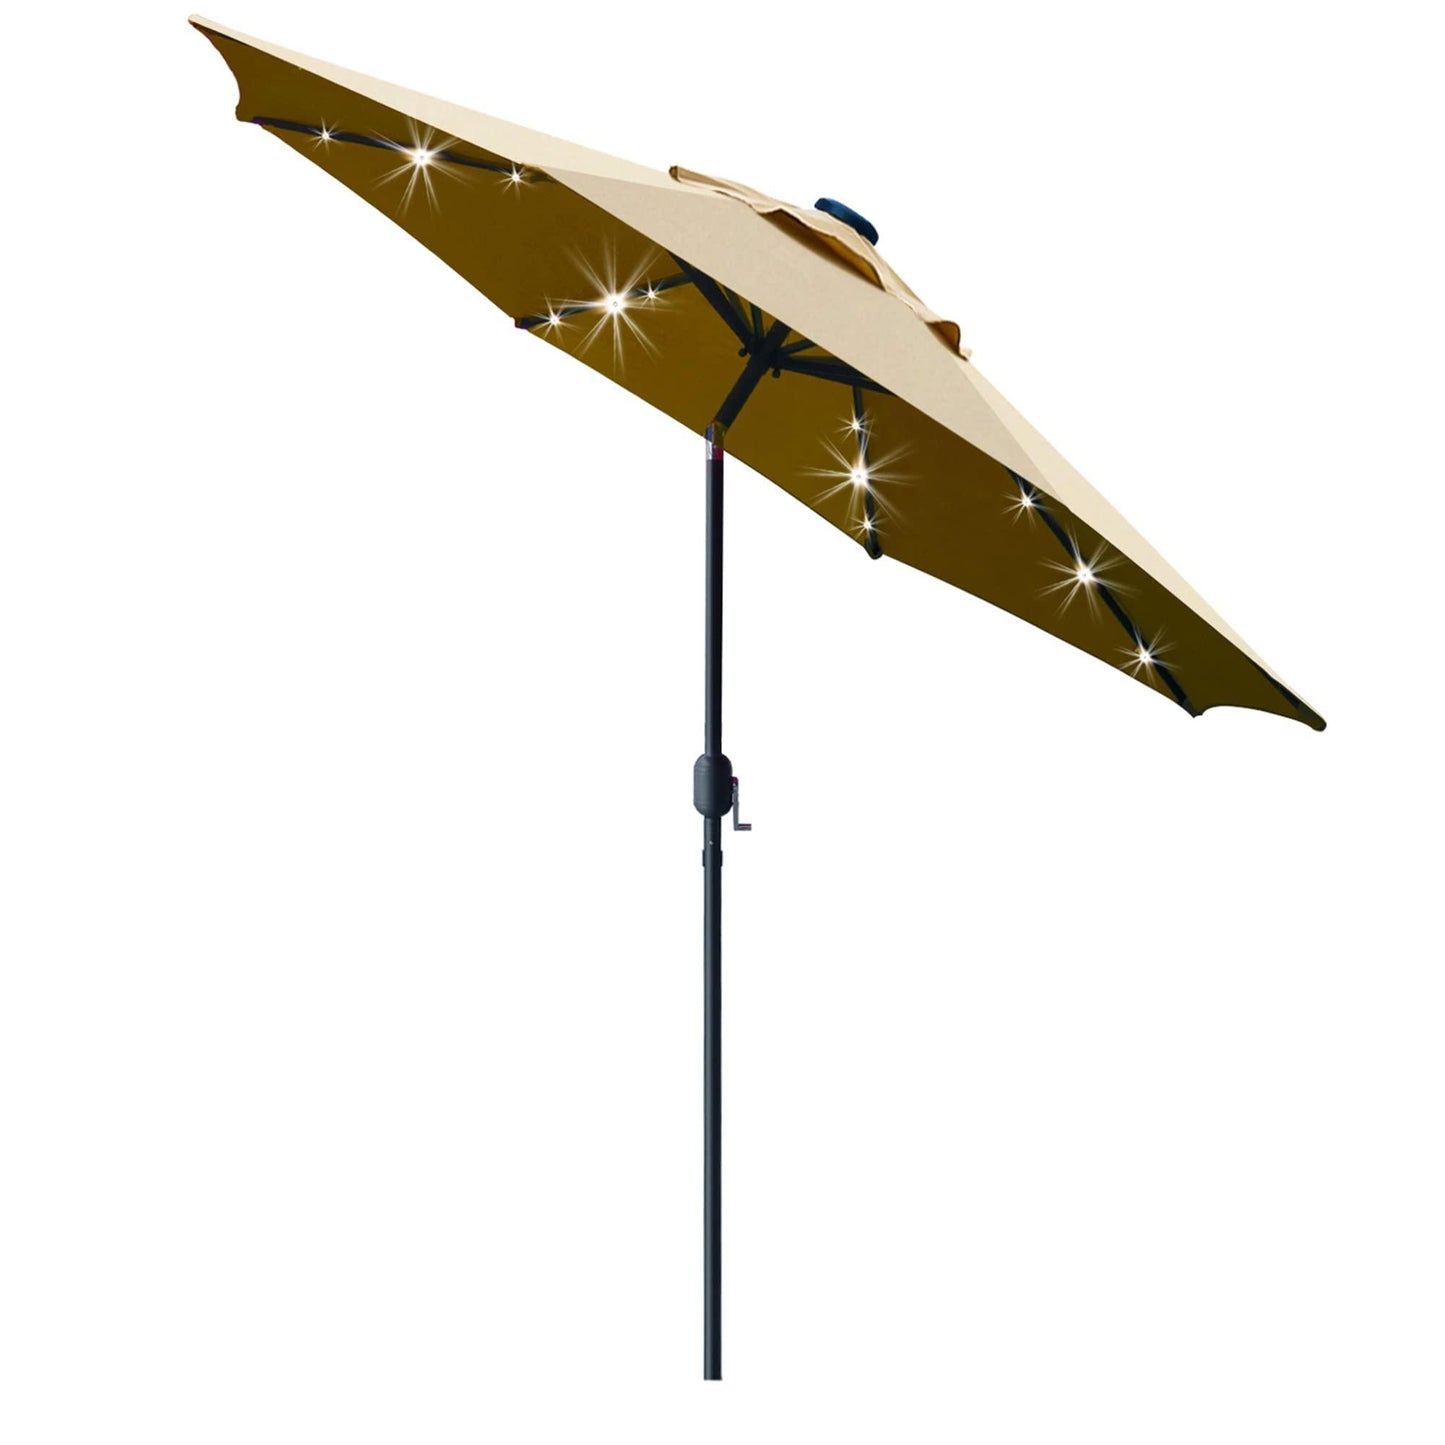 Sunnyglade 9' Solar LED Lighted Patio Umbrella with 8 Ribs/Tilt Adjustment and Crank Lift System (Light Tan) - CookCave